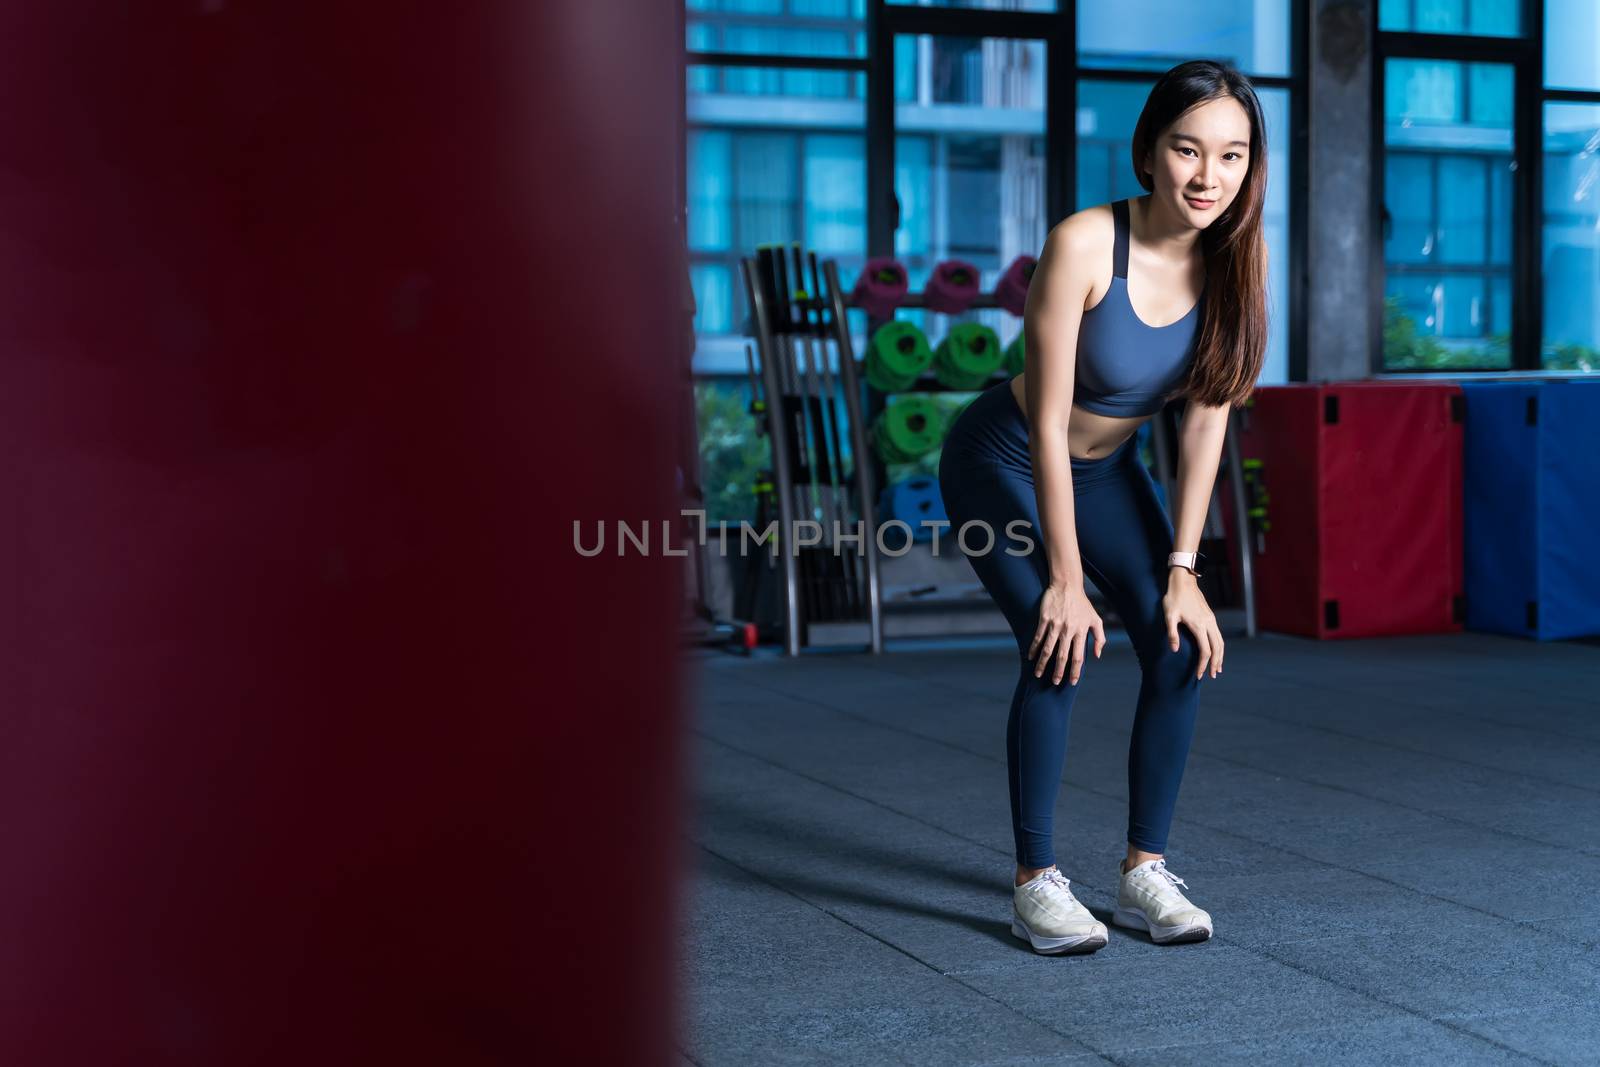 Asian Women rest during exercise. She's holding her hand at Knee with blur Racks Fitness Equipment background xhaustion and being alone at the gym sport and healthy concept